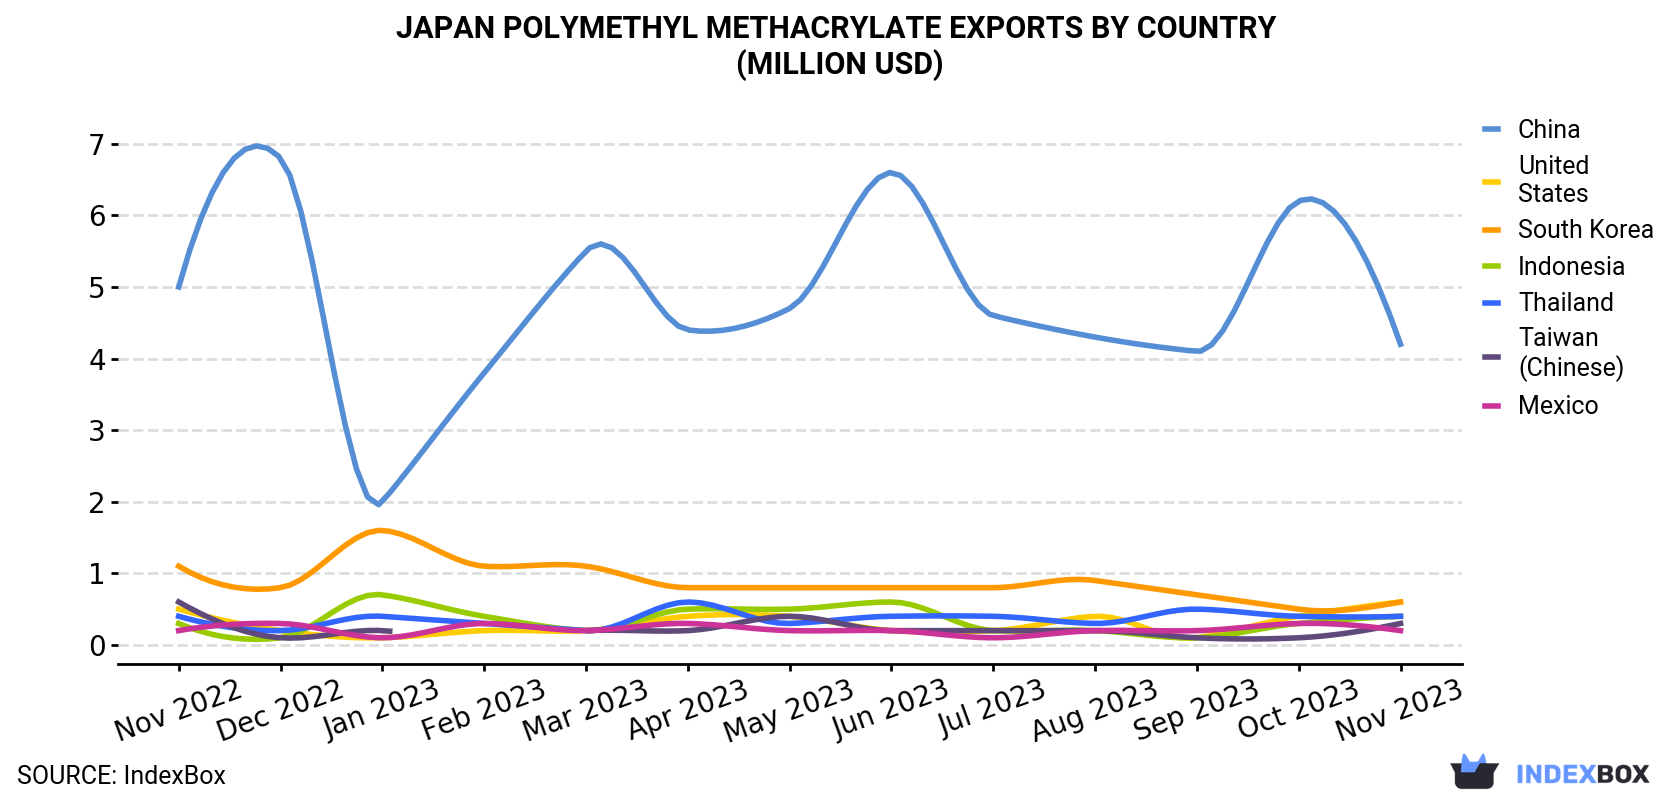 Japan Polymethyl Methacrylate Exports By Country (Million USD)